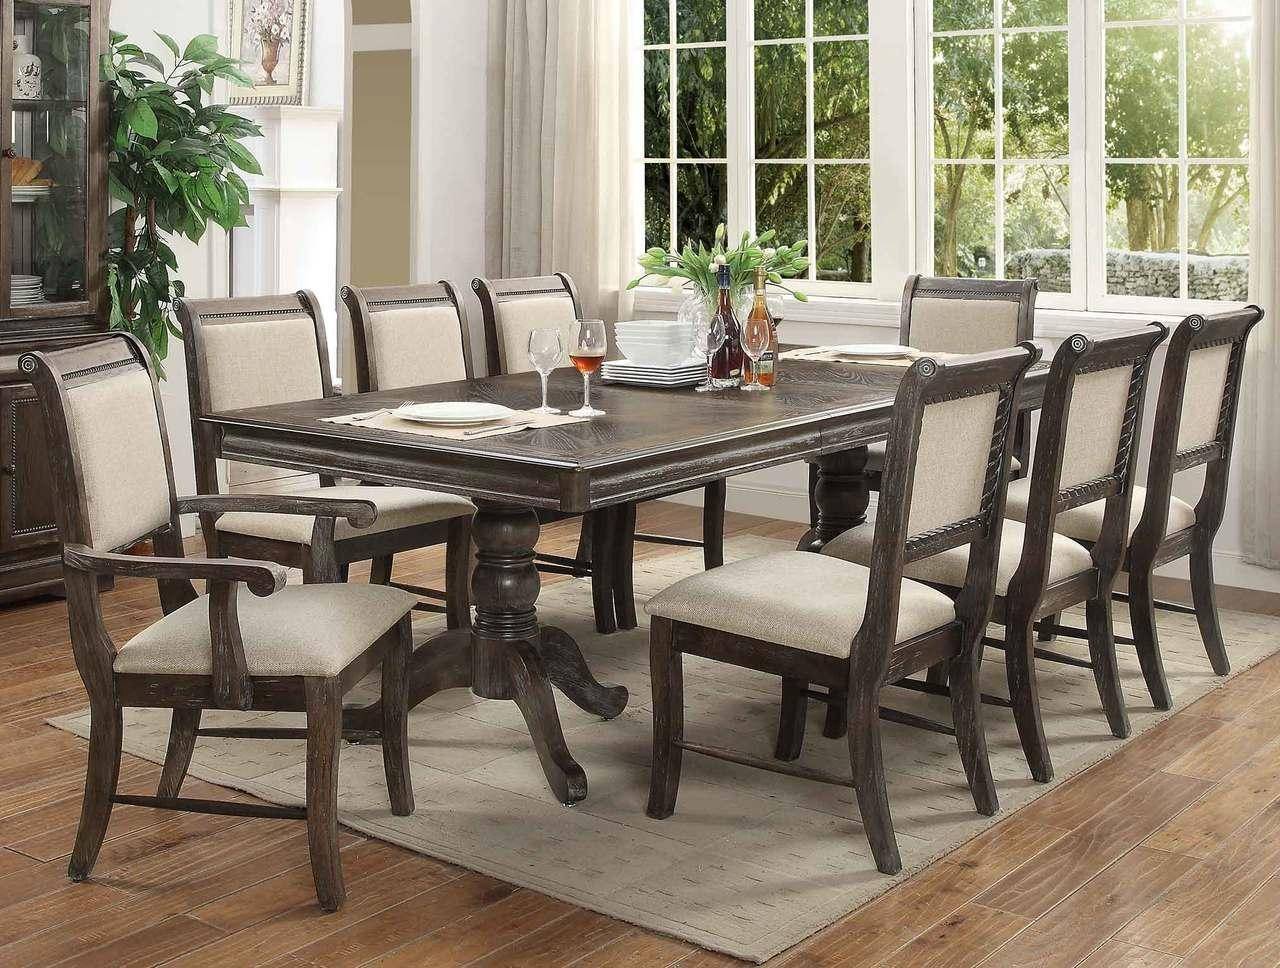 where to buy dining room set